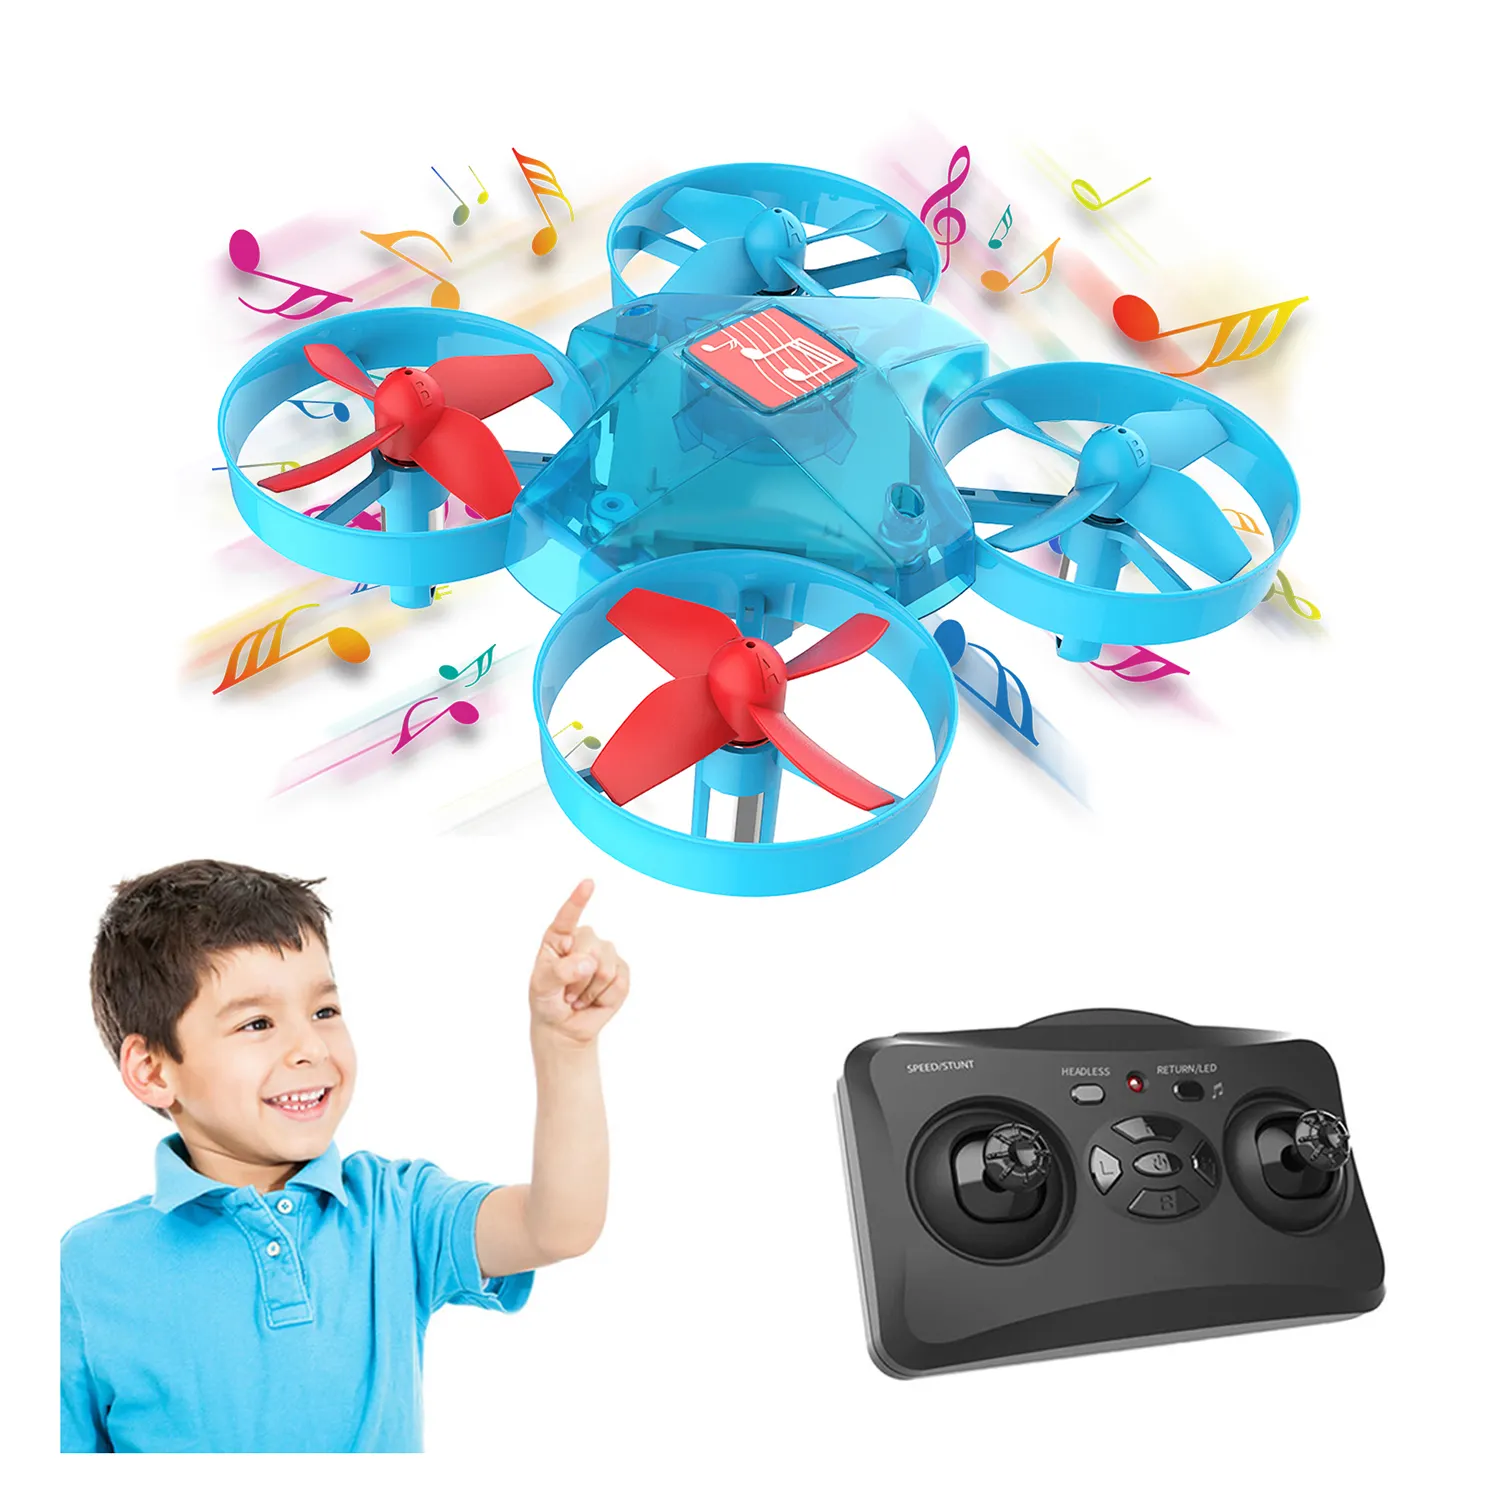 Flying drone kids toys Aircraft 6 Axis Gyro Headless Mode Remote Control Kids Quadcopter Toy rc helicopter